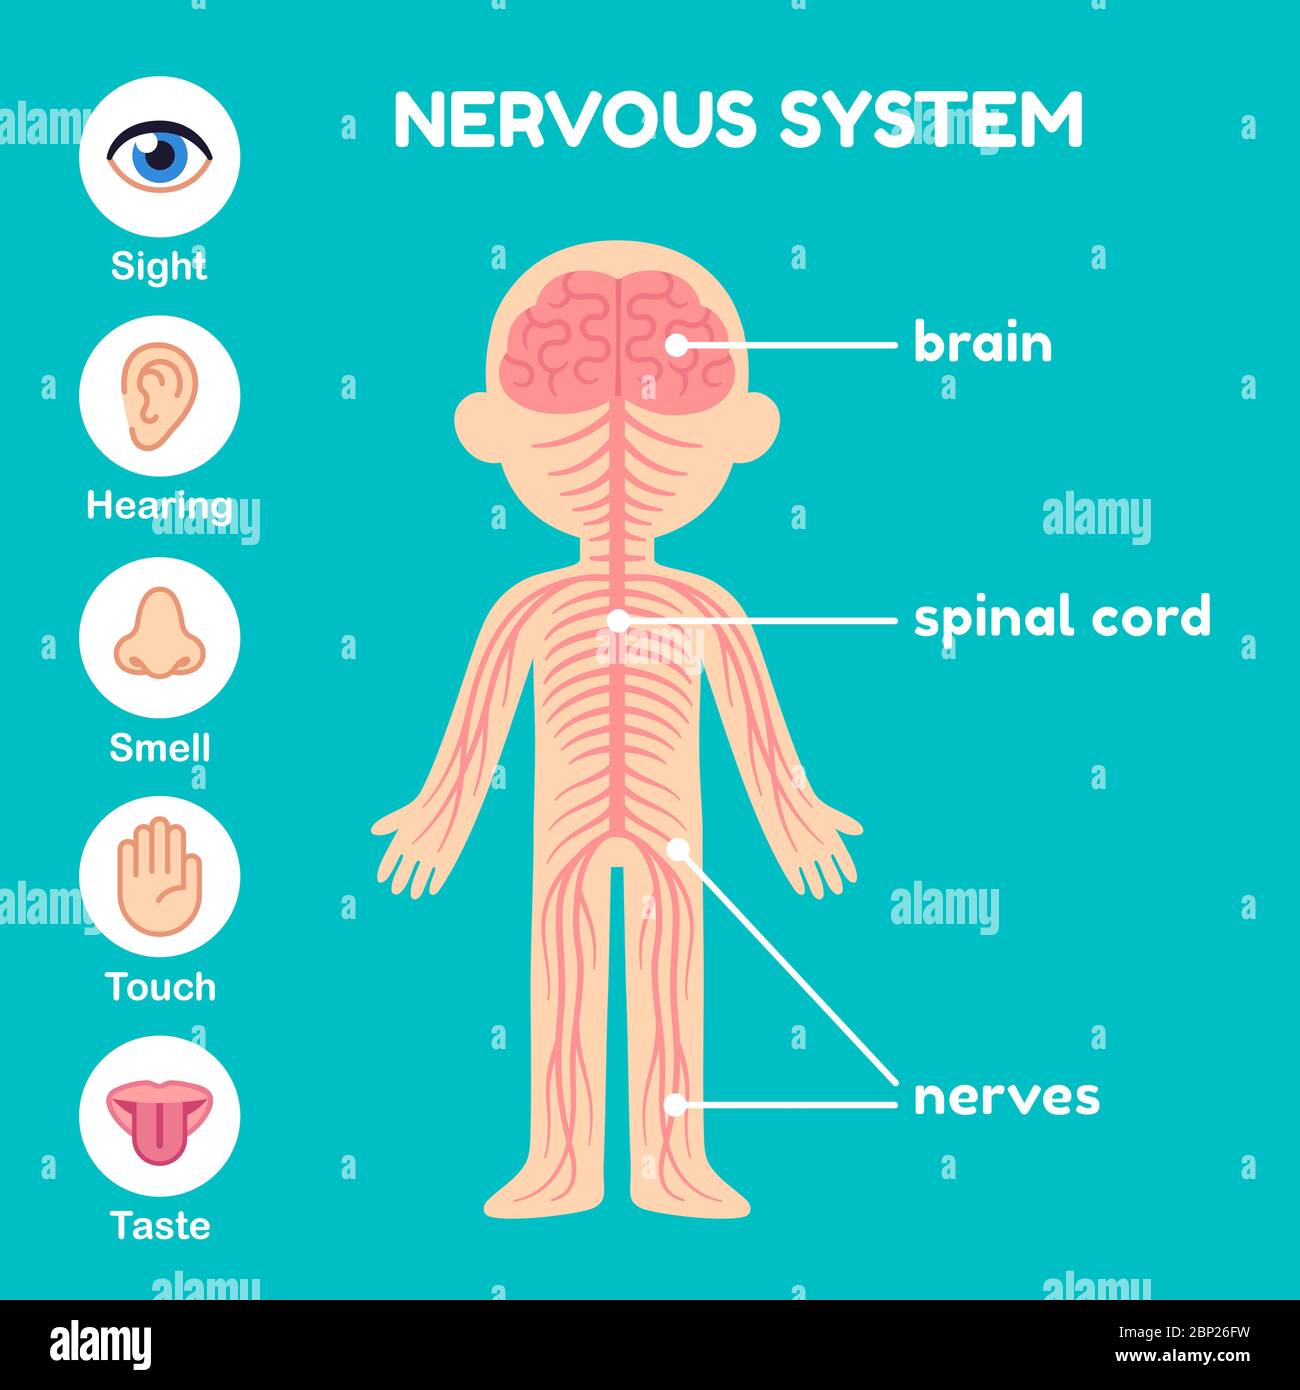 Nervous system, educational anatomy infographic  chart for kids.  Nerves, spinal cord, brain and the five senses. Simple cartoon style illustration. Stock Vector